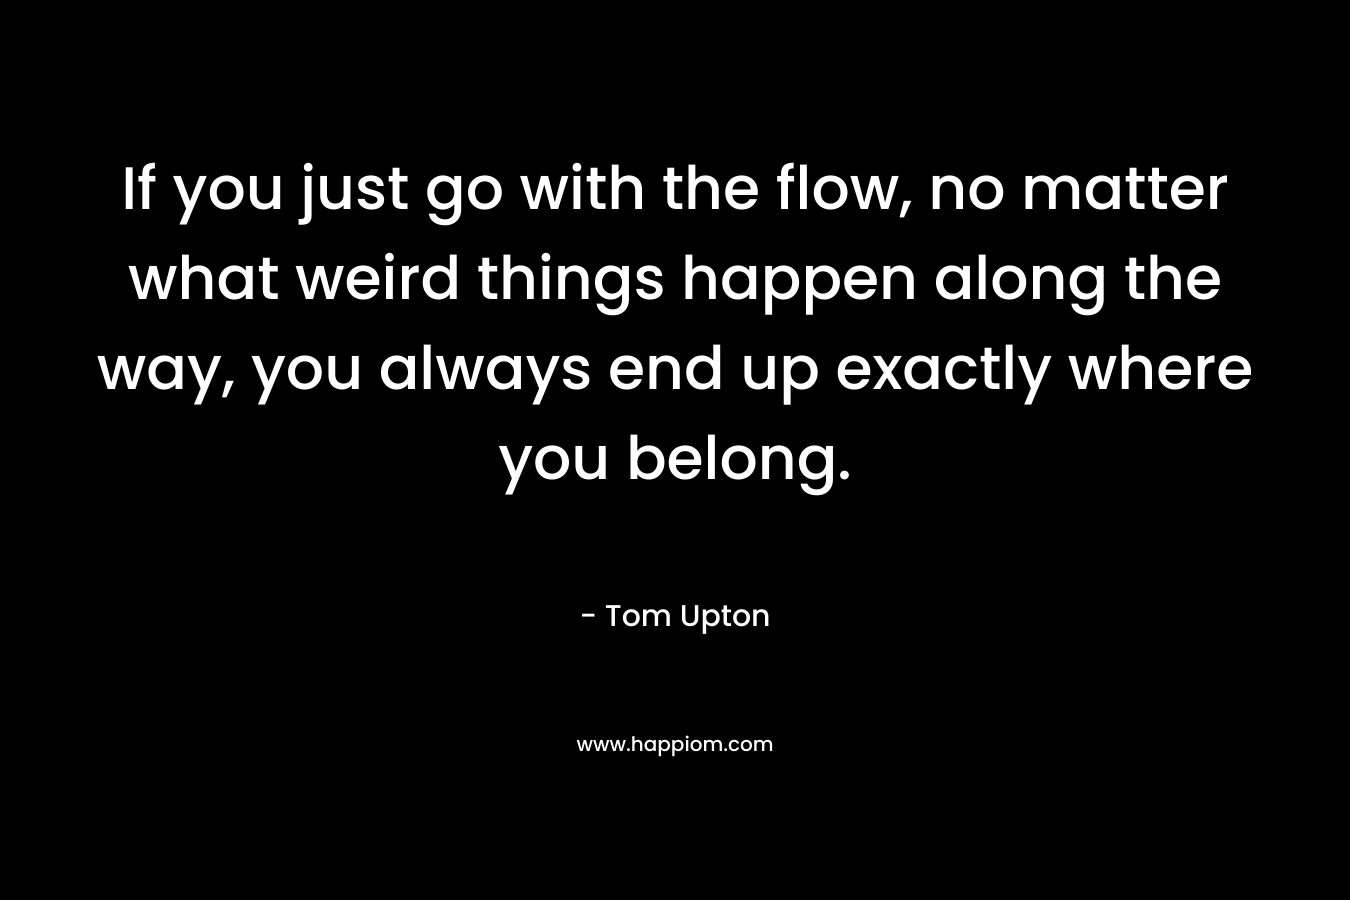 If you just go with the flow, no matter what weird things happen along the way, you always end up exactly where you belong.